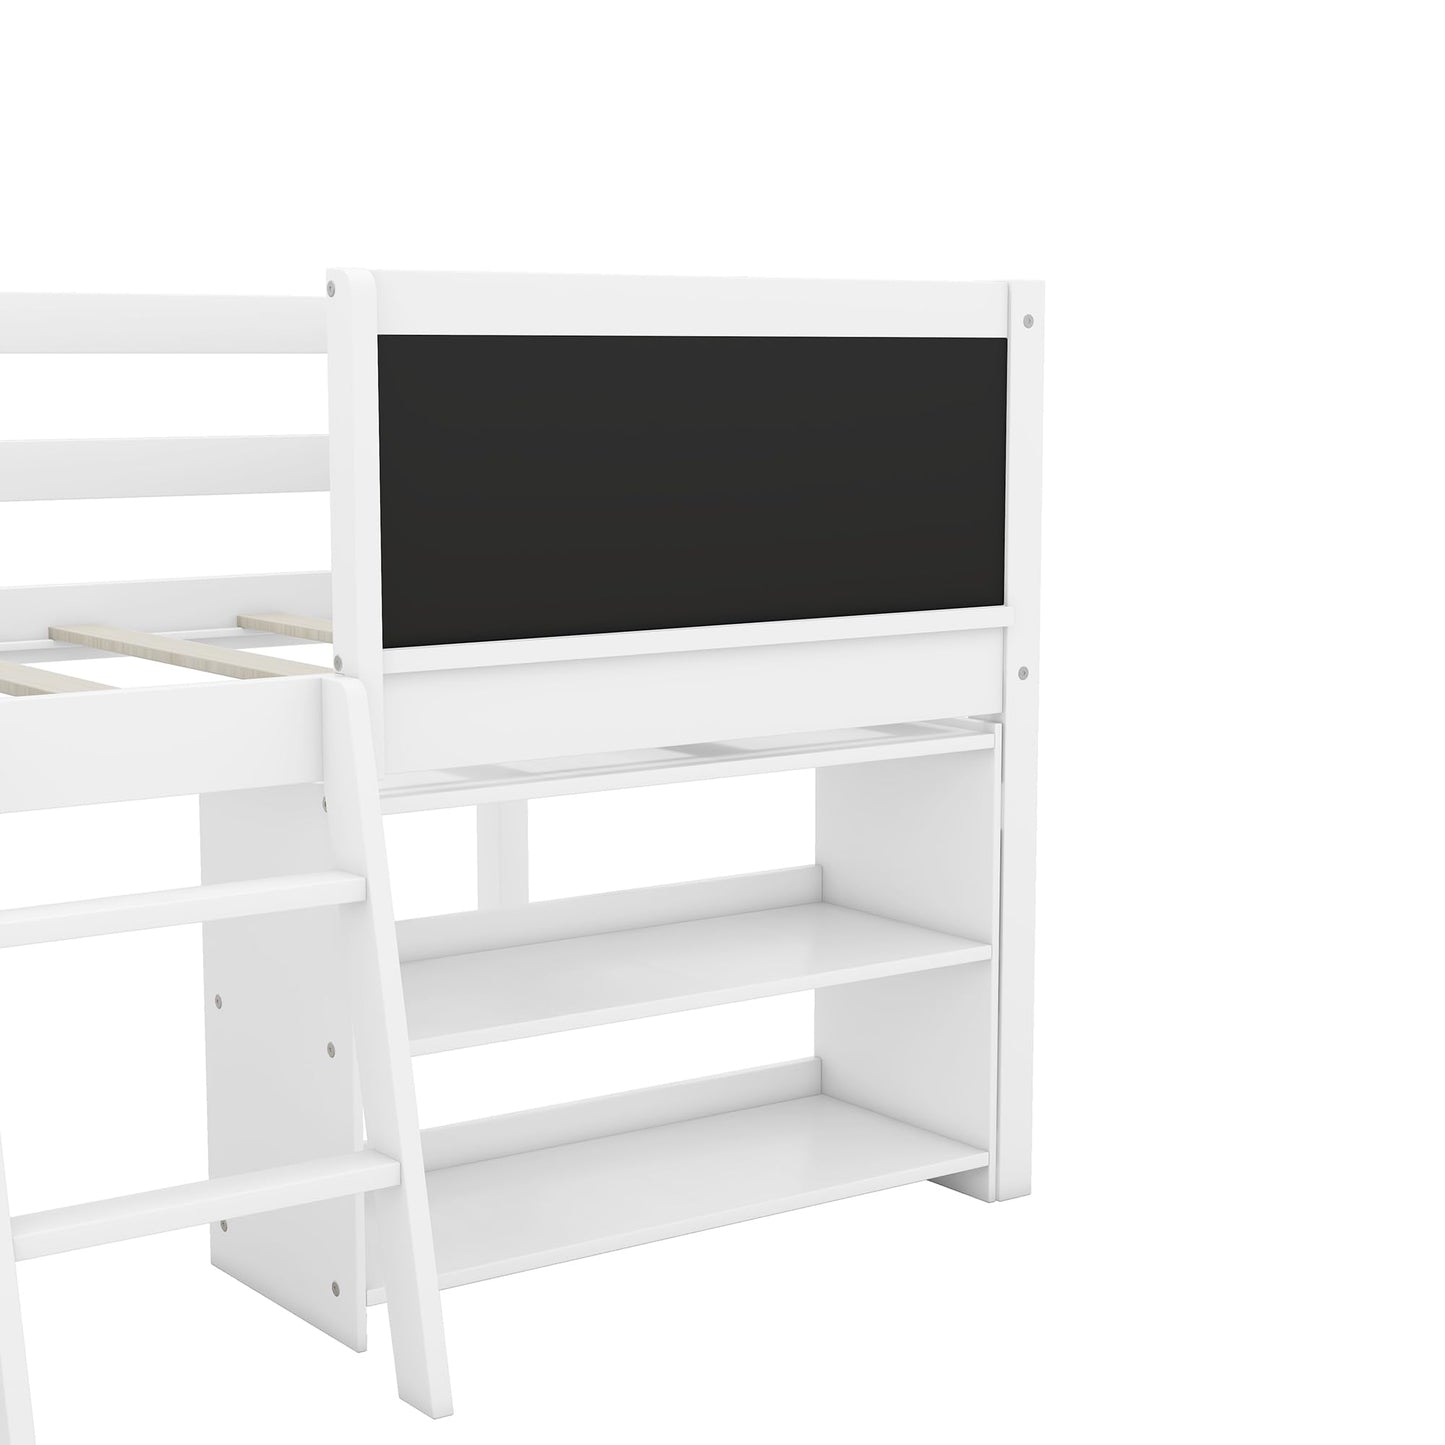 SOFTSEA Twin Size Low Loft Bed with Two Movable Shelves and Ladder, Wooden Loft Bed with Decorative Guardrail and Chalkboard for Kids, Whtie